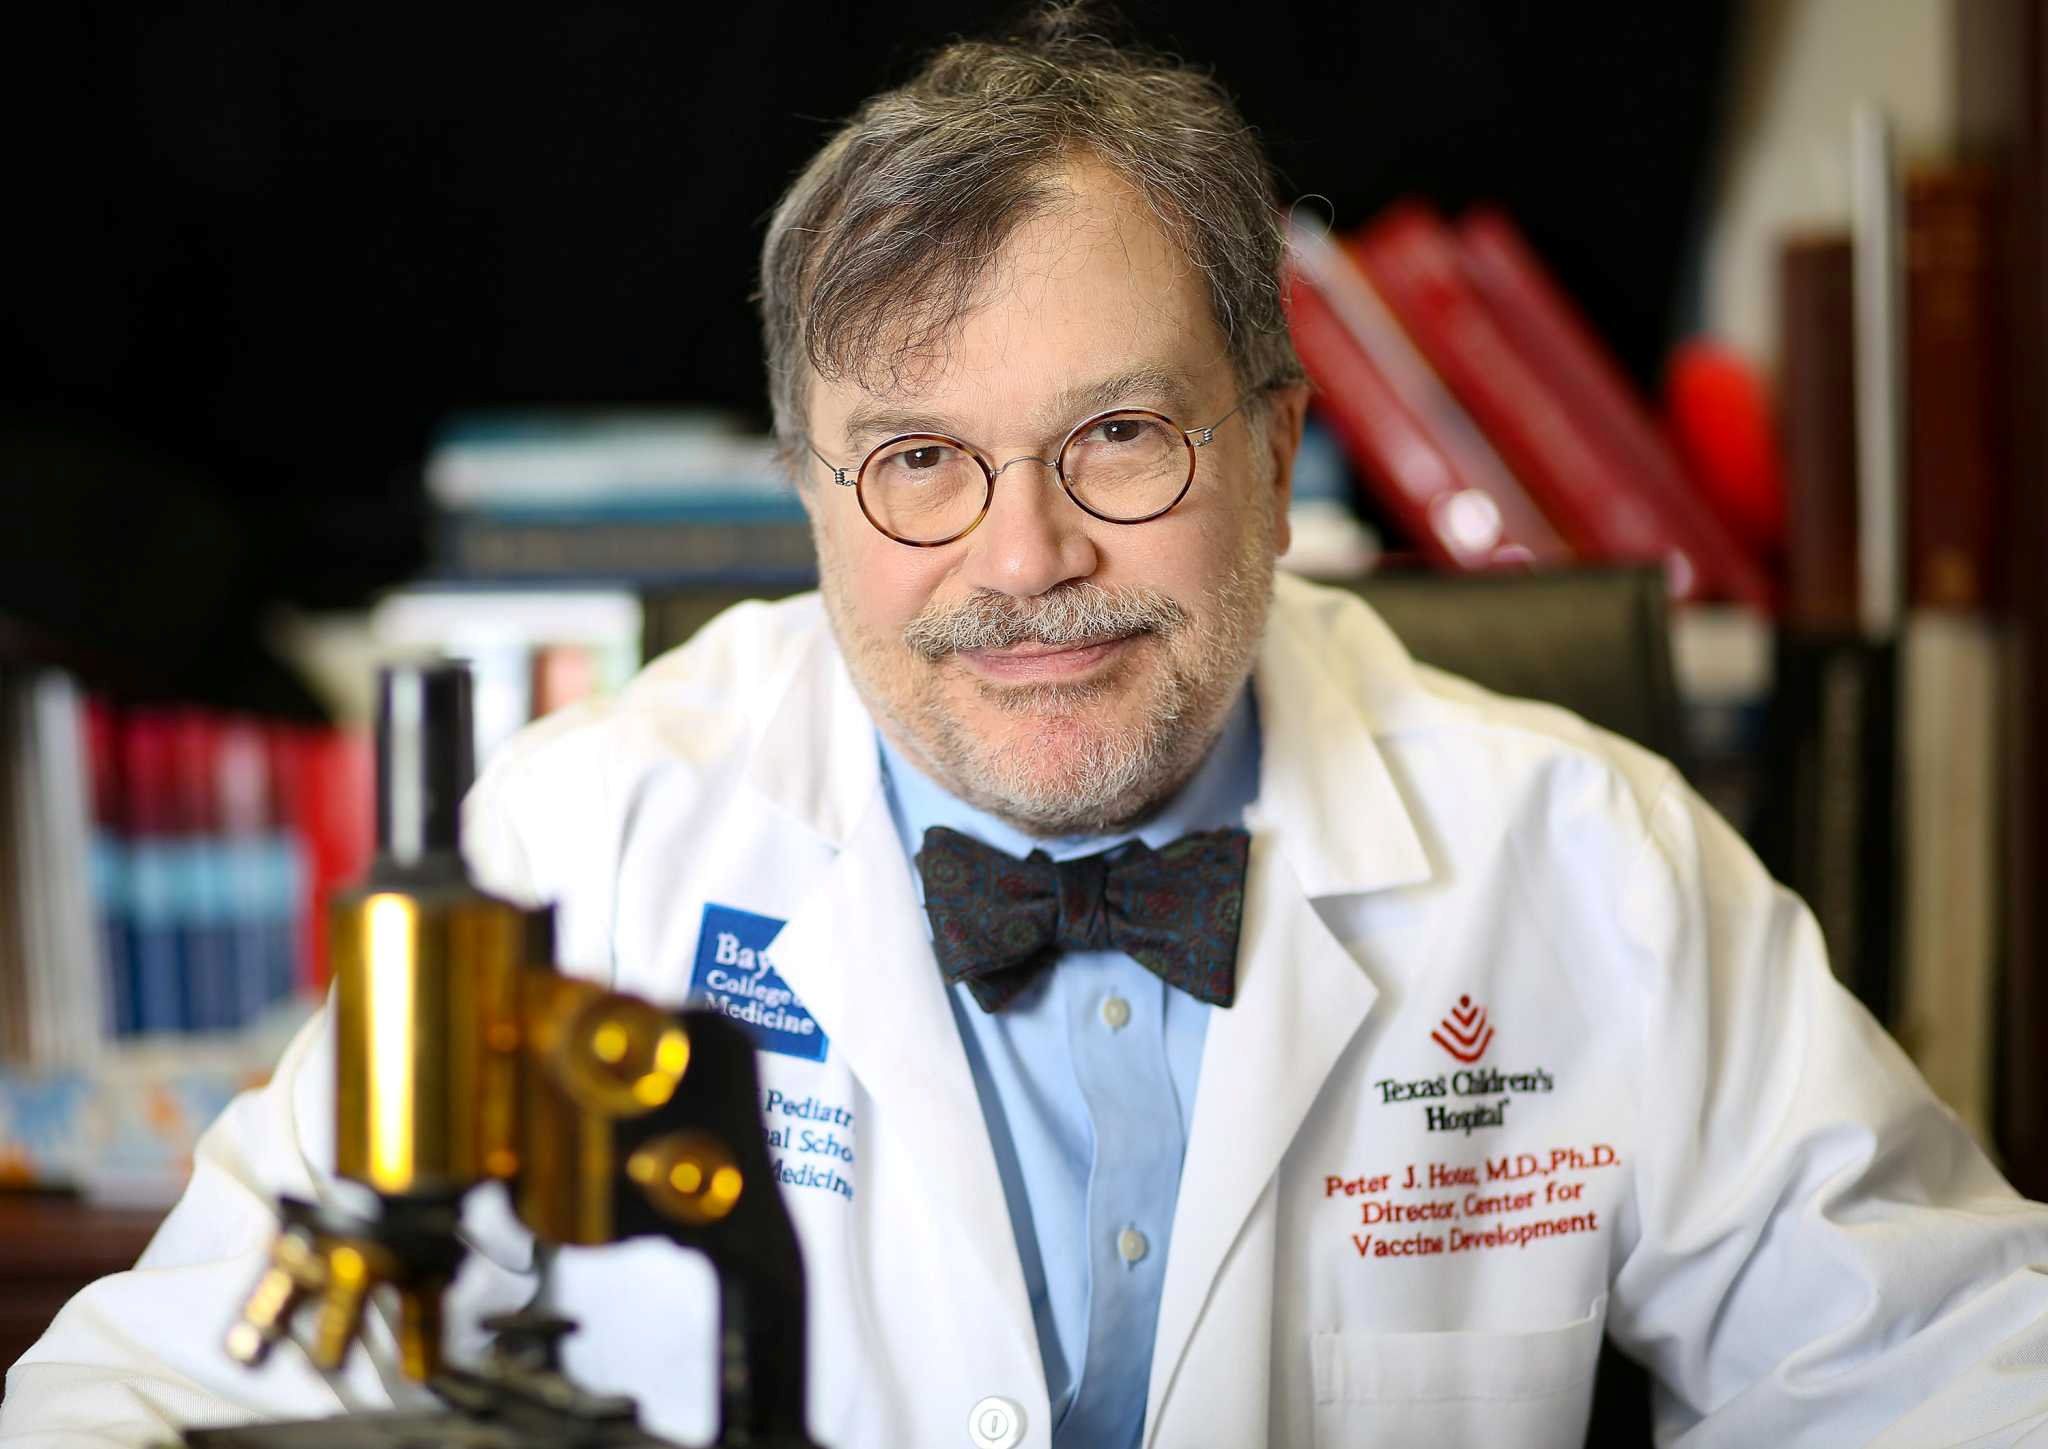 14-intriguing-facts-about-dr-peter-j-hotez